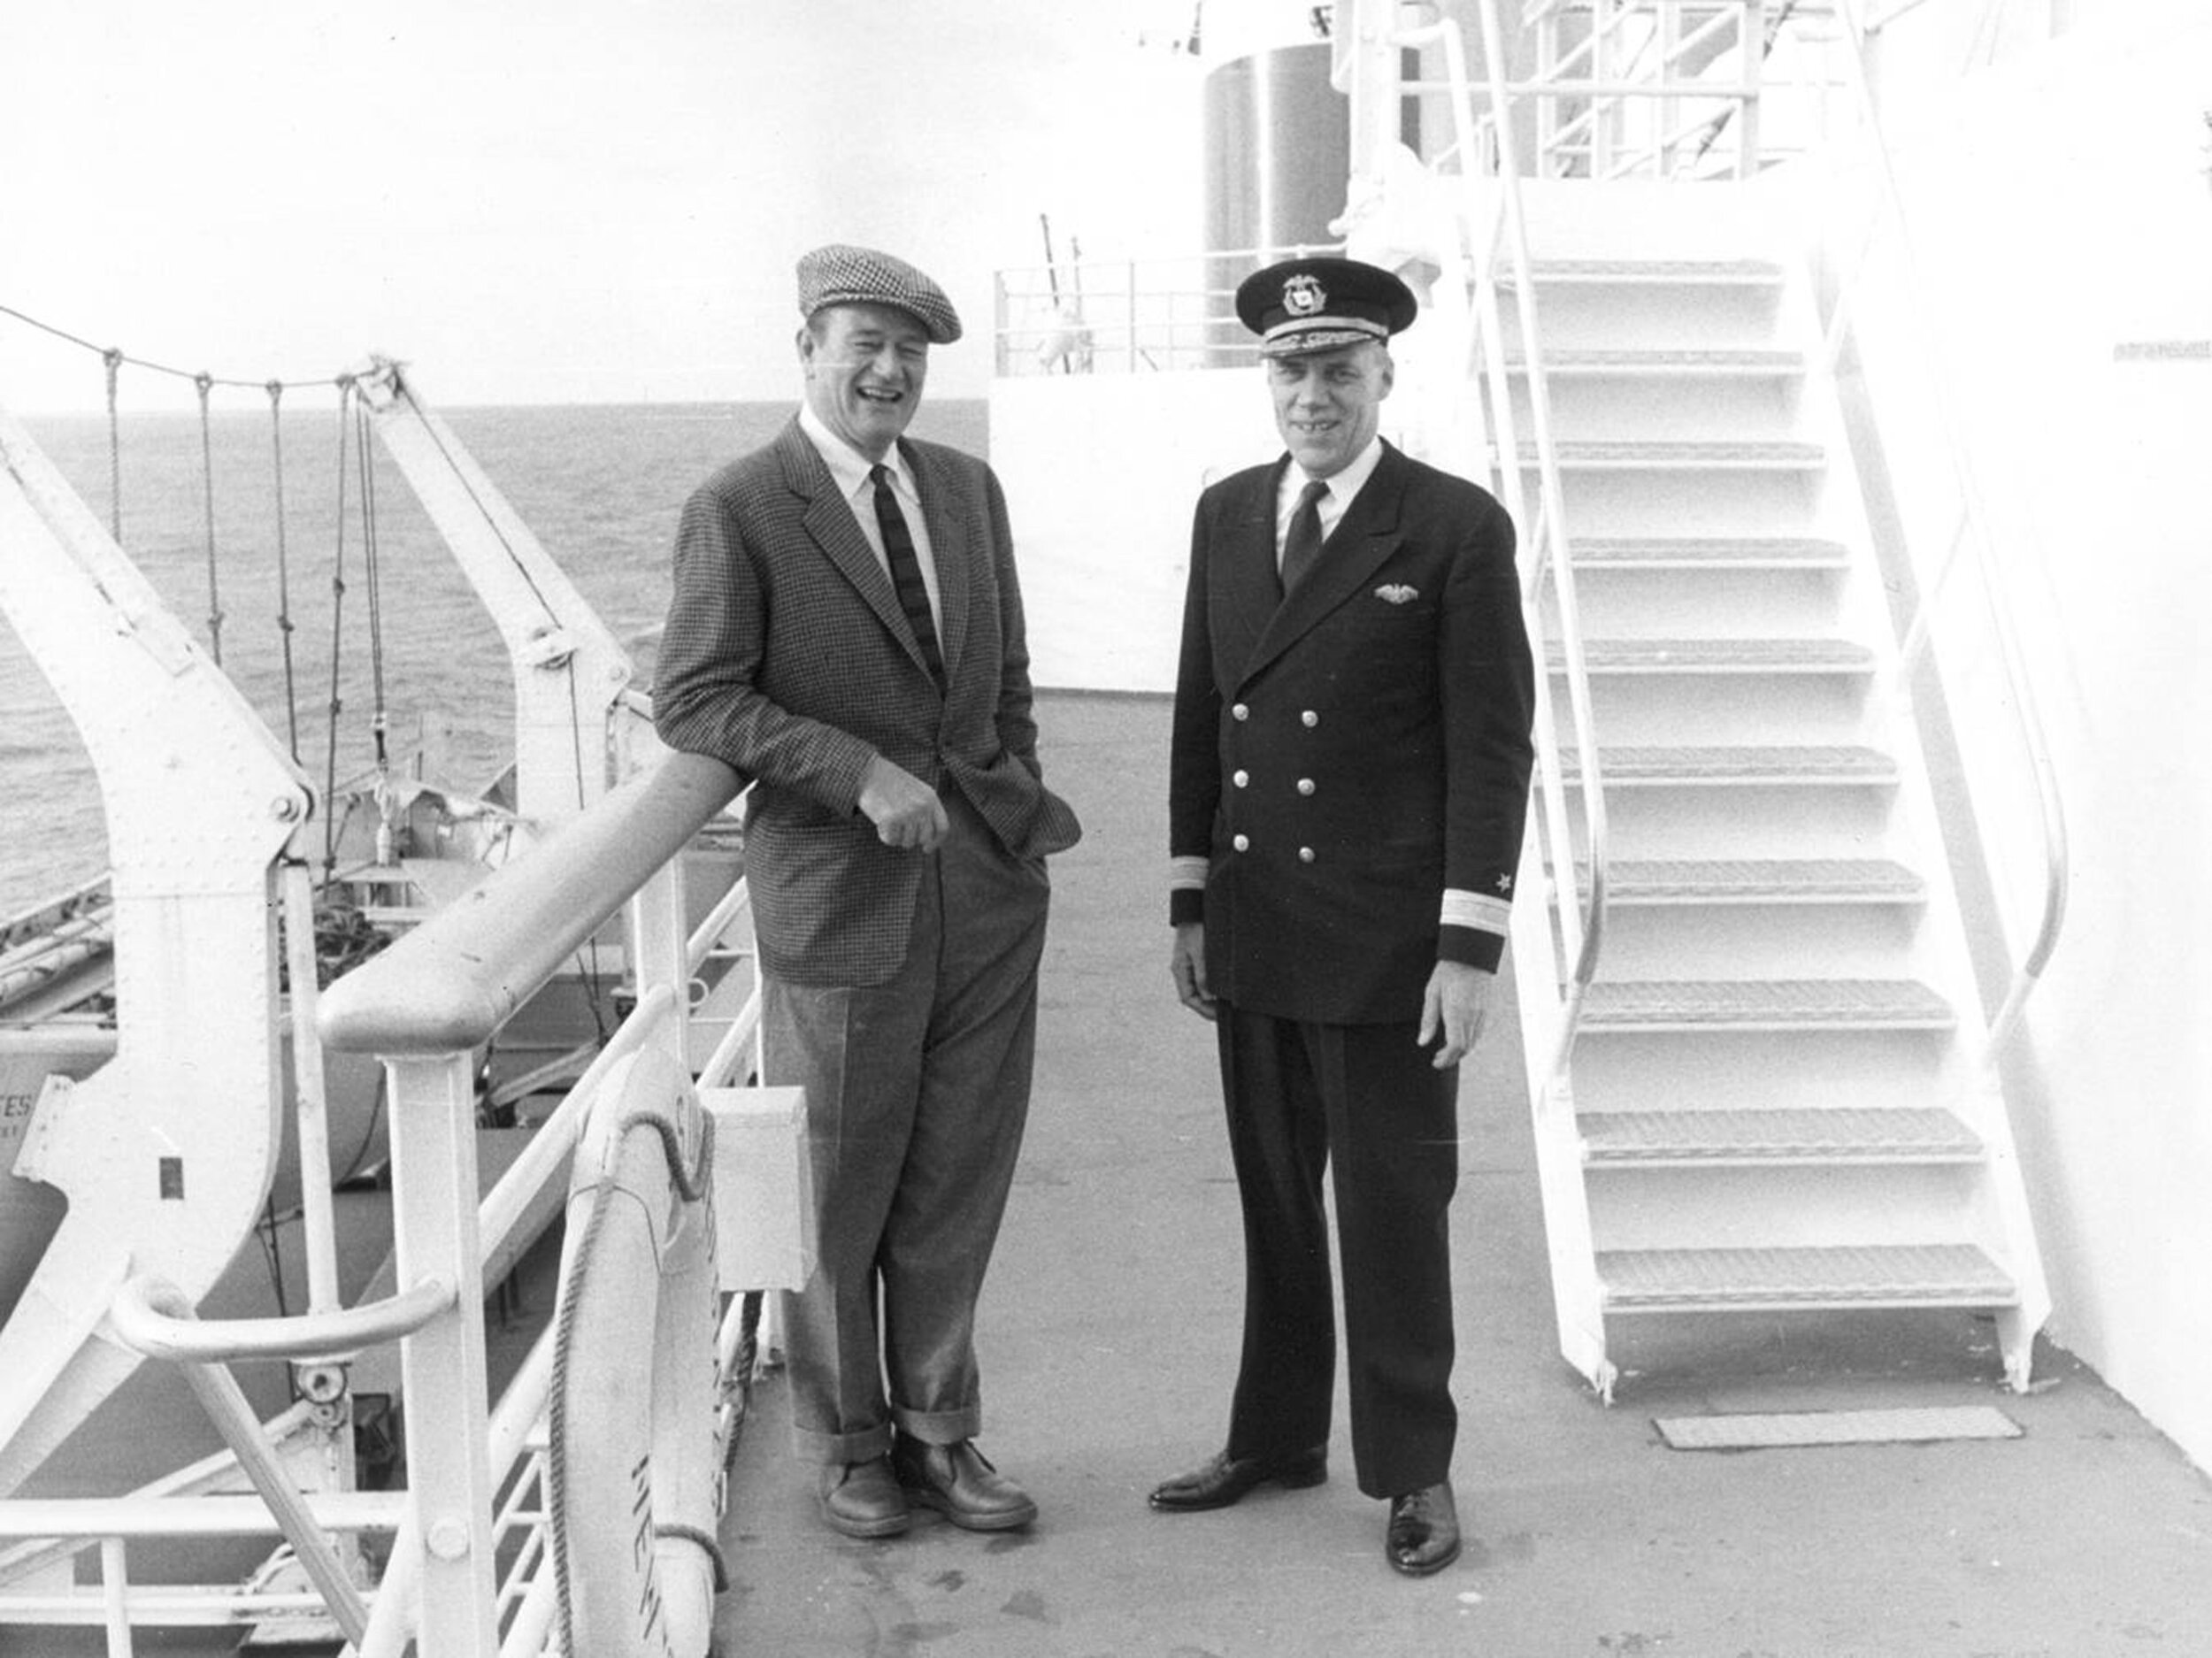 John Wayne and Commodore John Anderson, captain of the SS United States, on deck (Image courtesy of Charles Anderson)